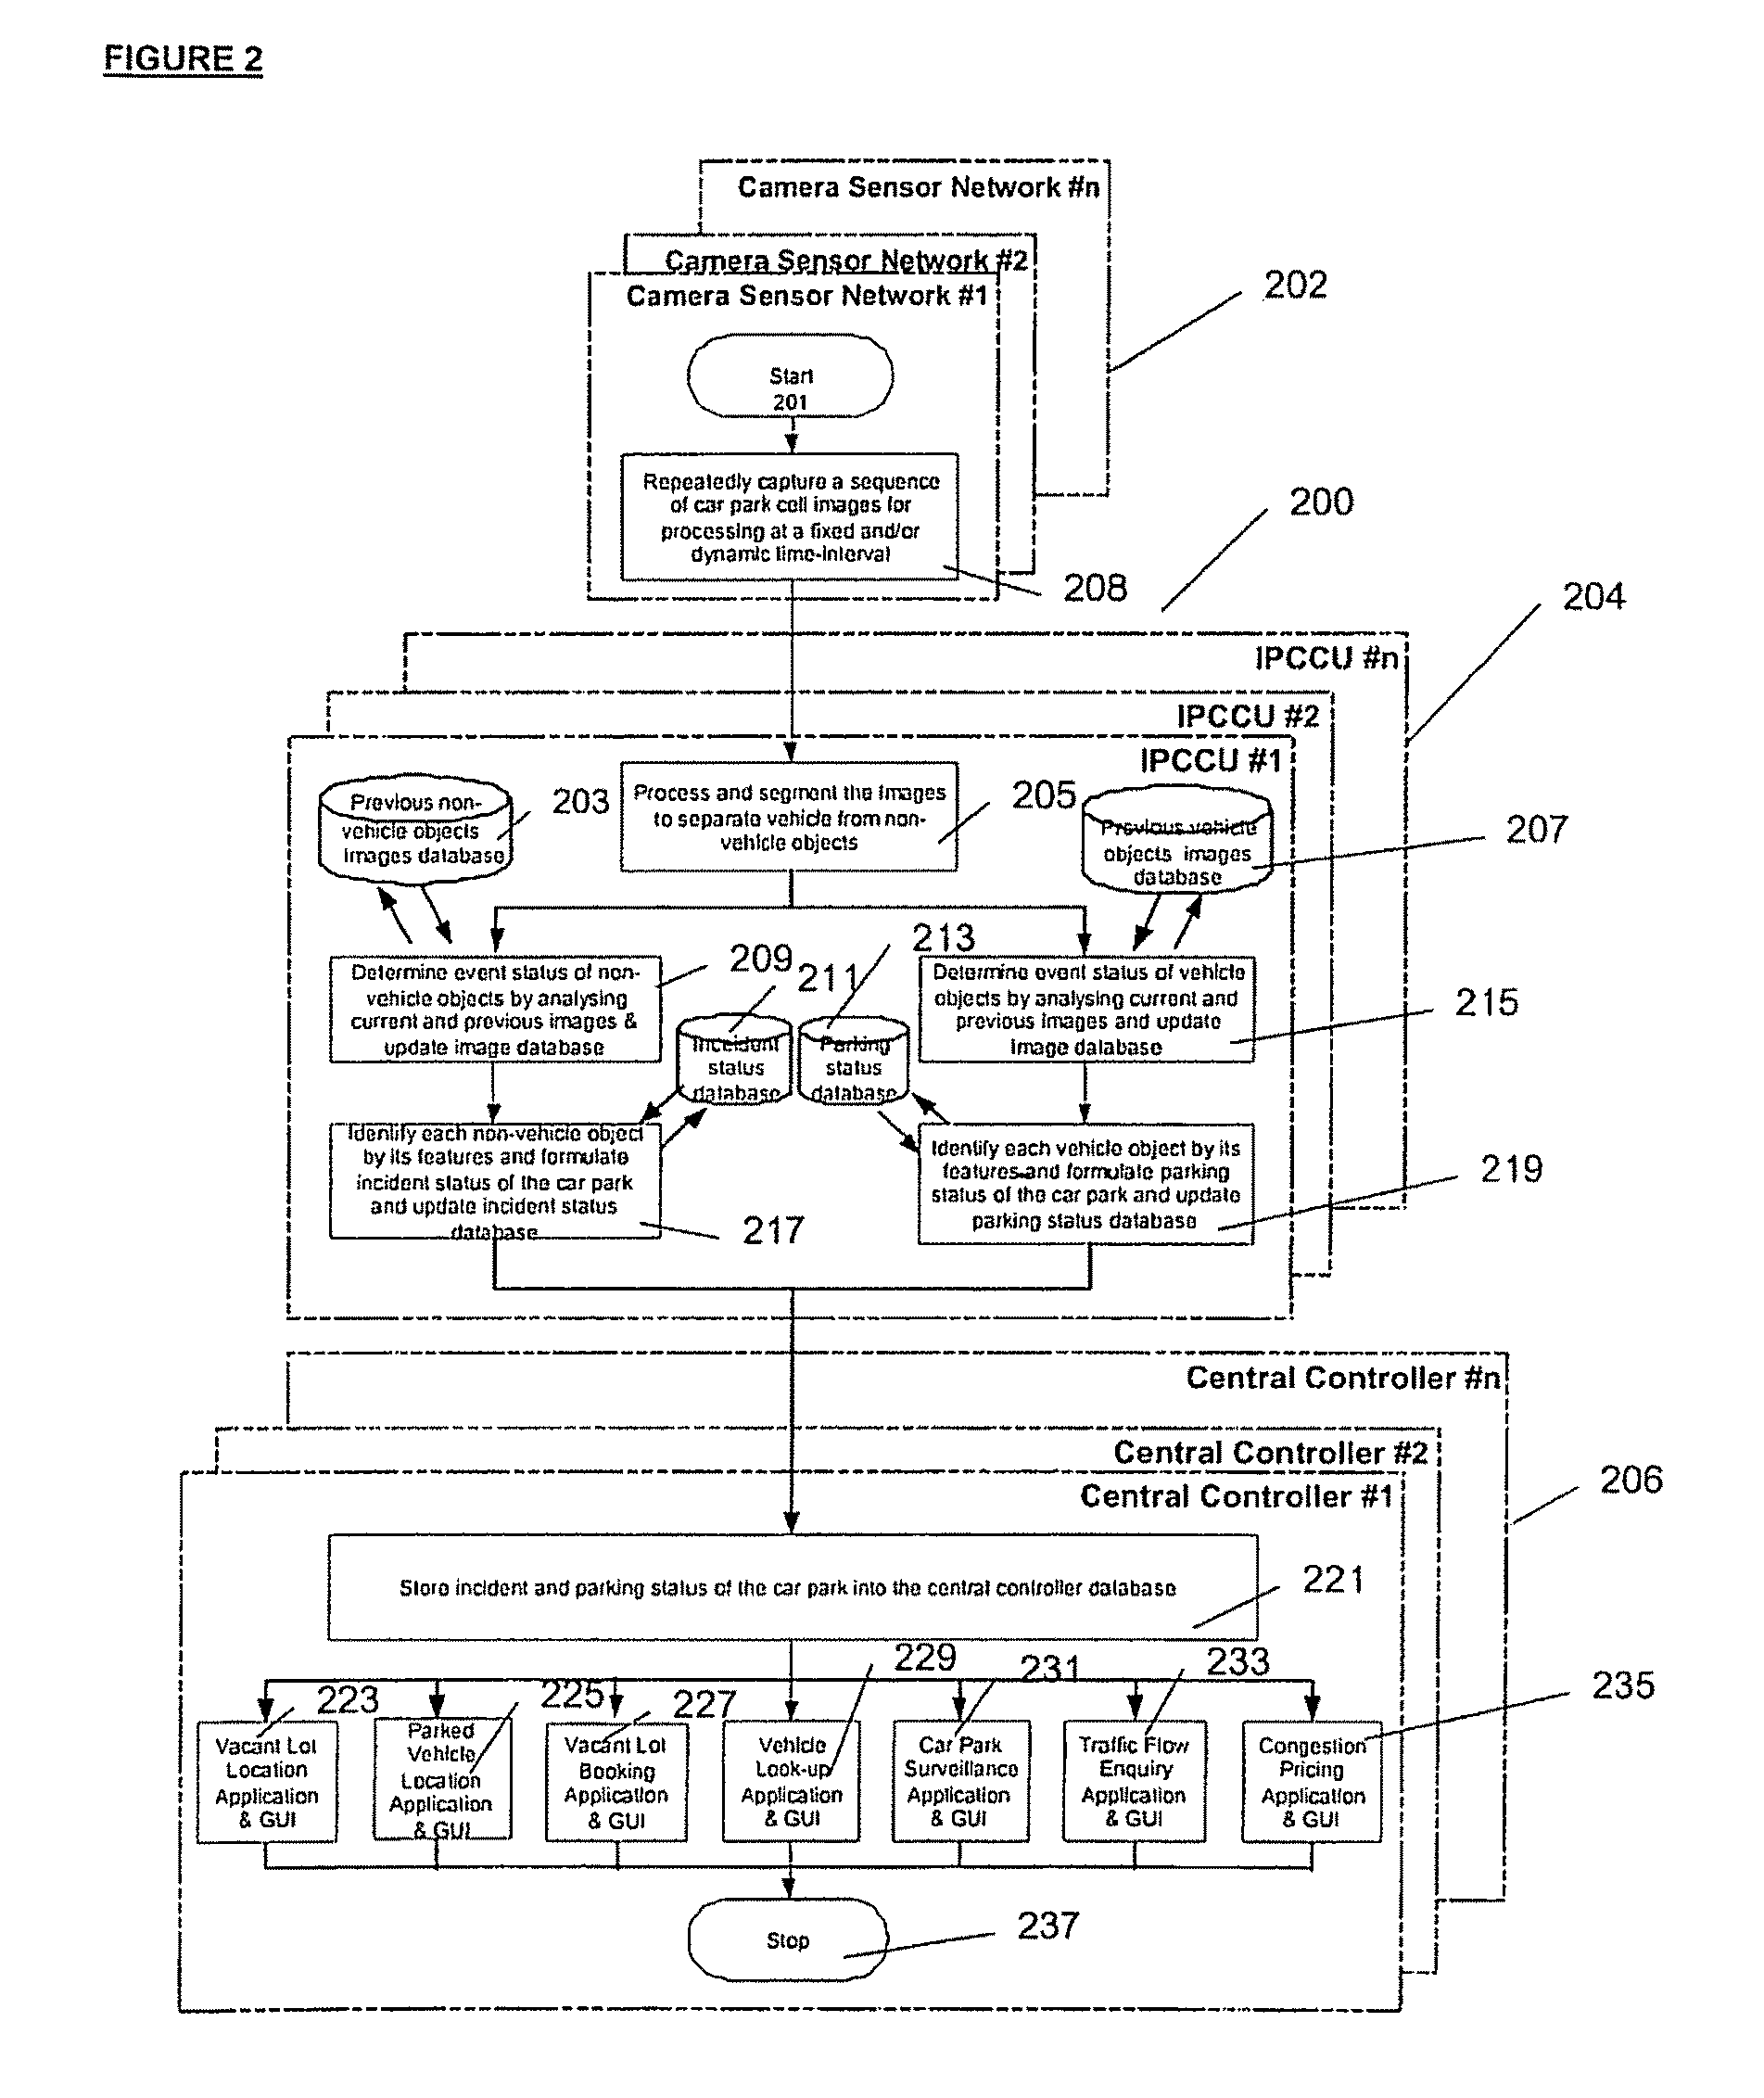 Apparatus and method  for  locating, identifying and tracking vehicles in a parking area